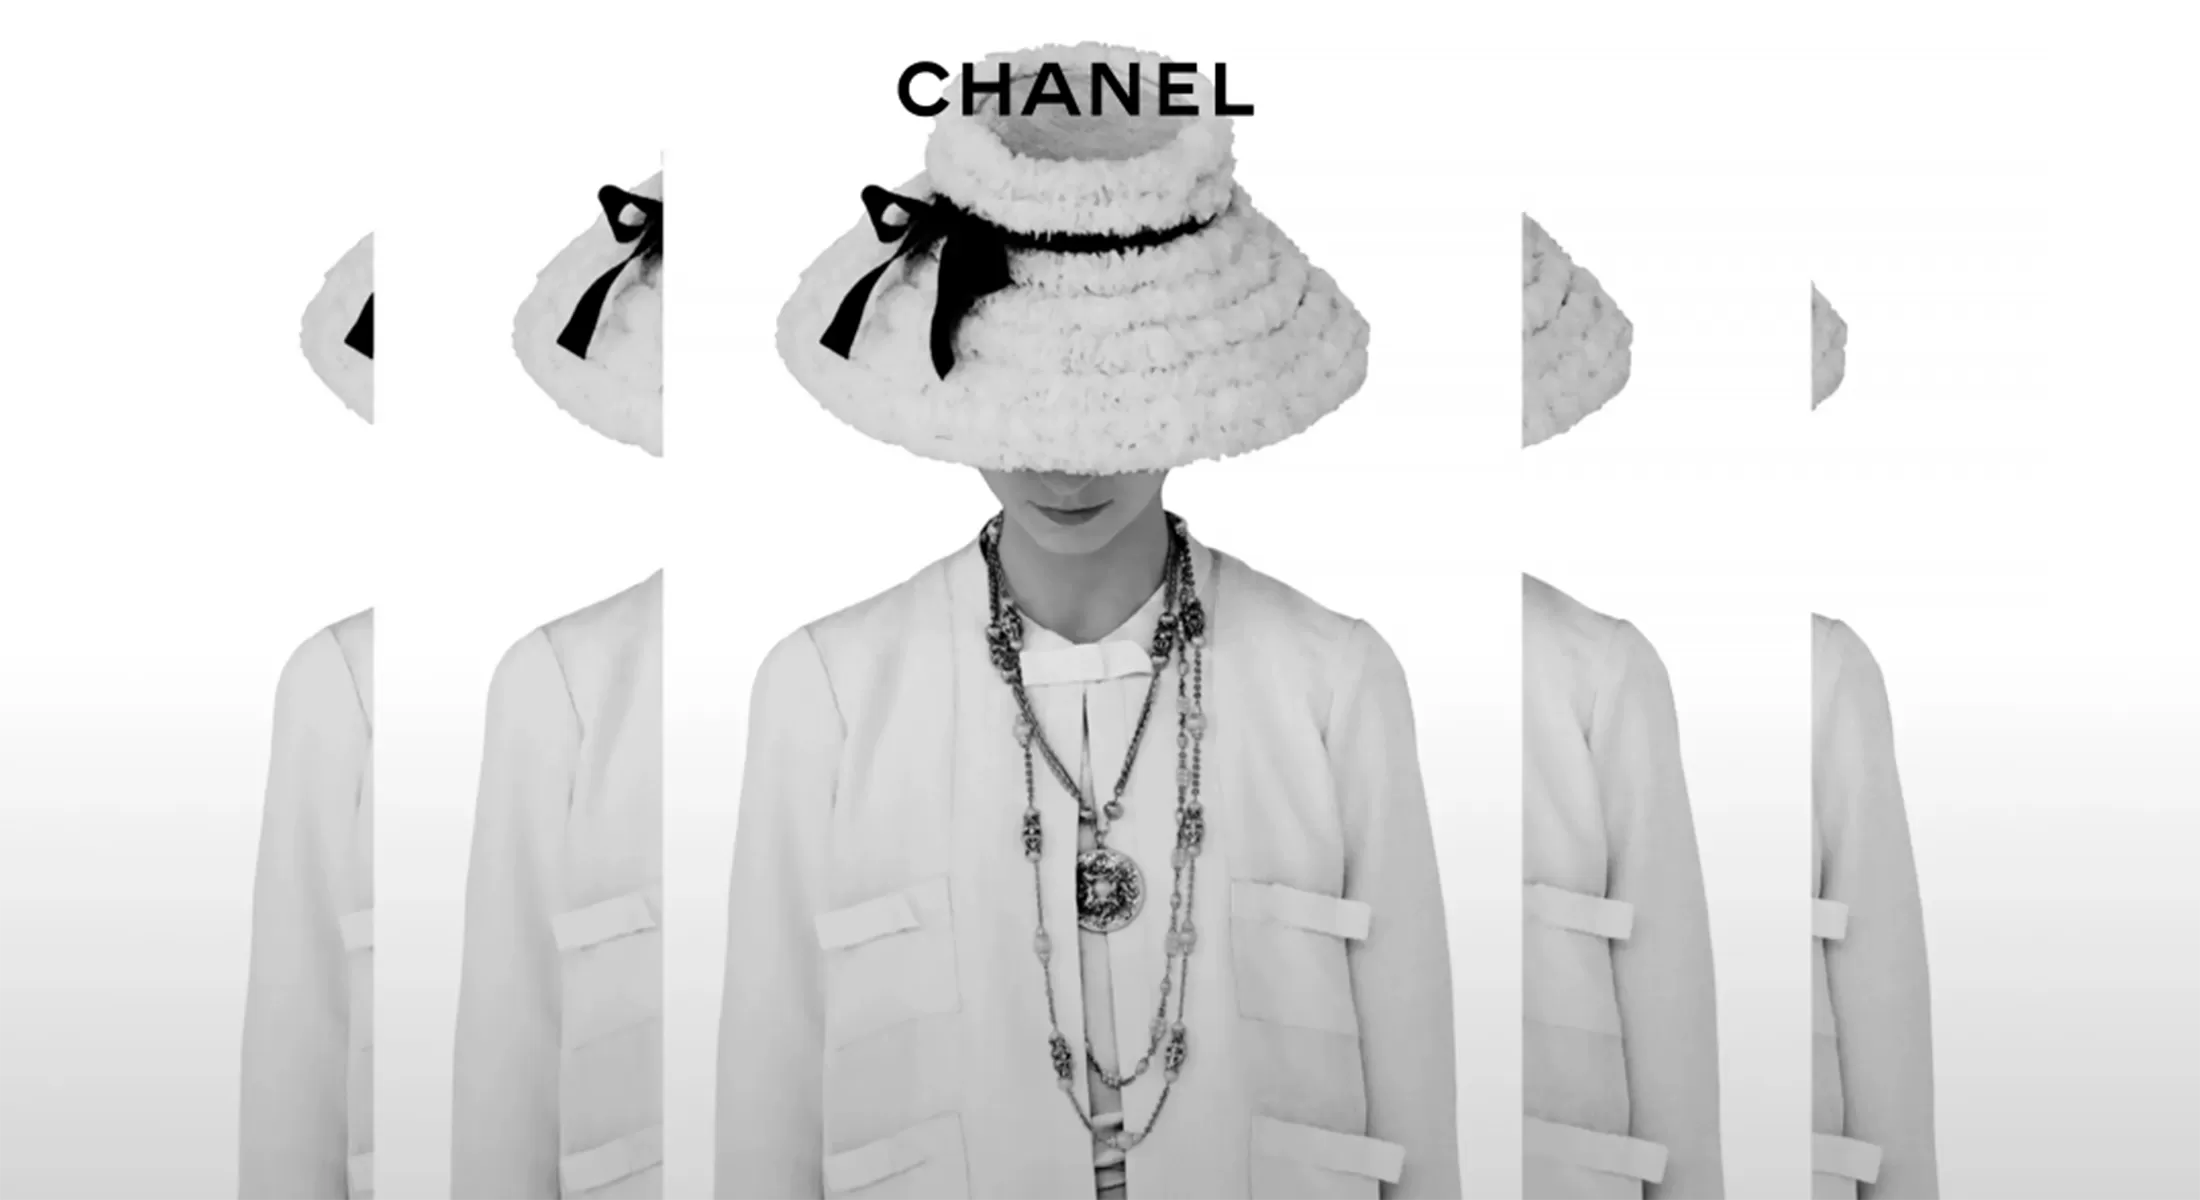 coco chanel youtube